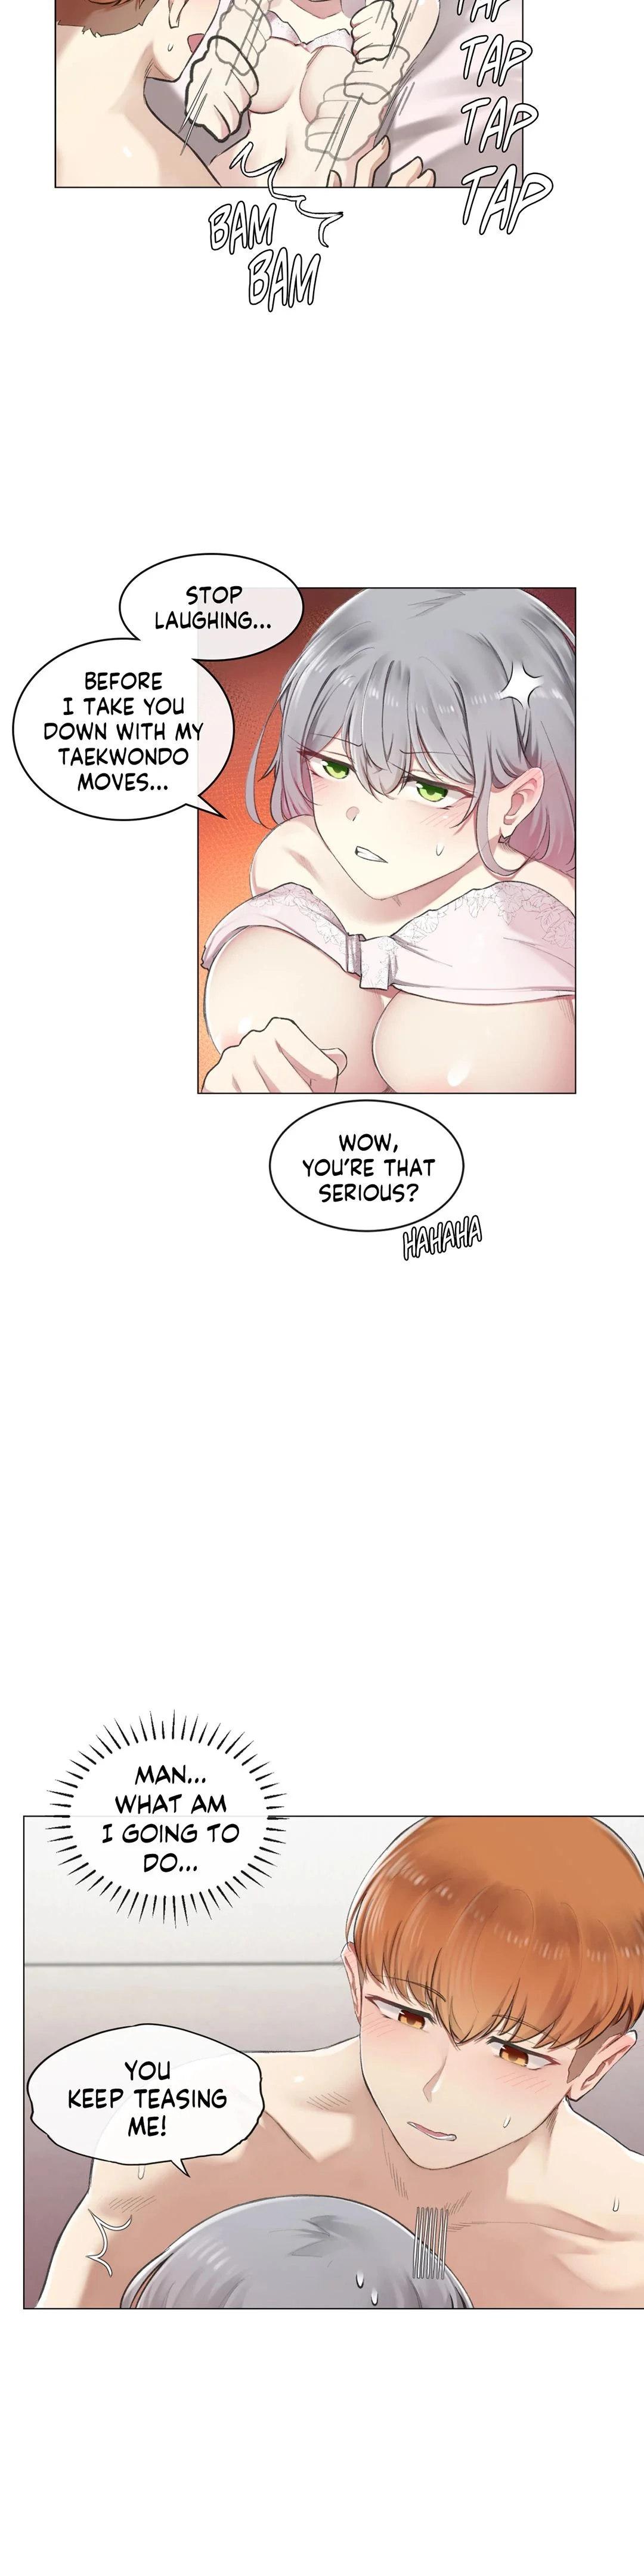 [Dumangoon, KONG_] Sexcape Room: Snap Off Ch.7/7 [English] [Manhwa PDF] Completed 109